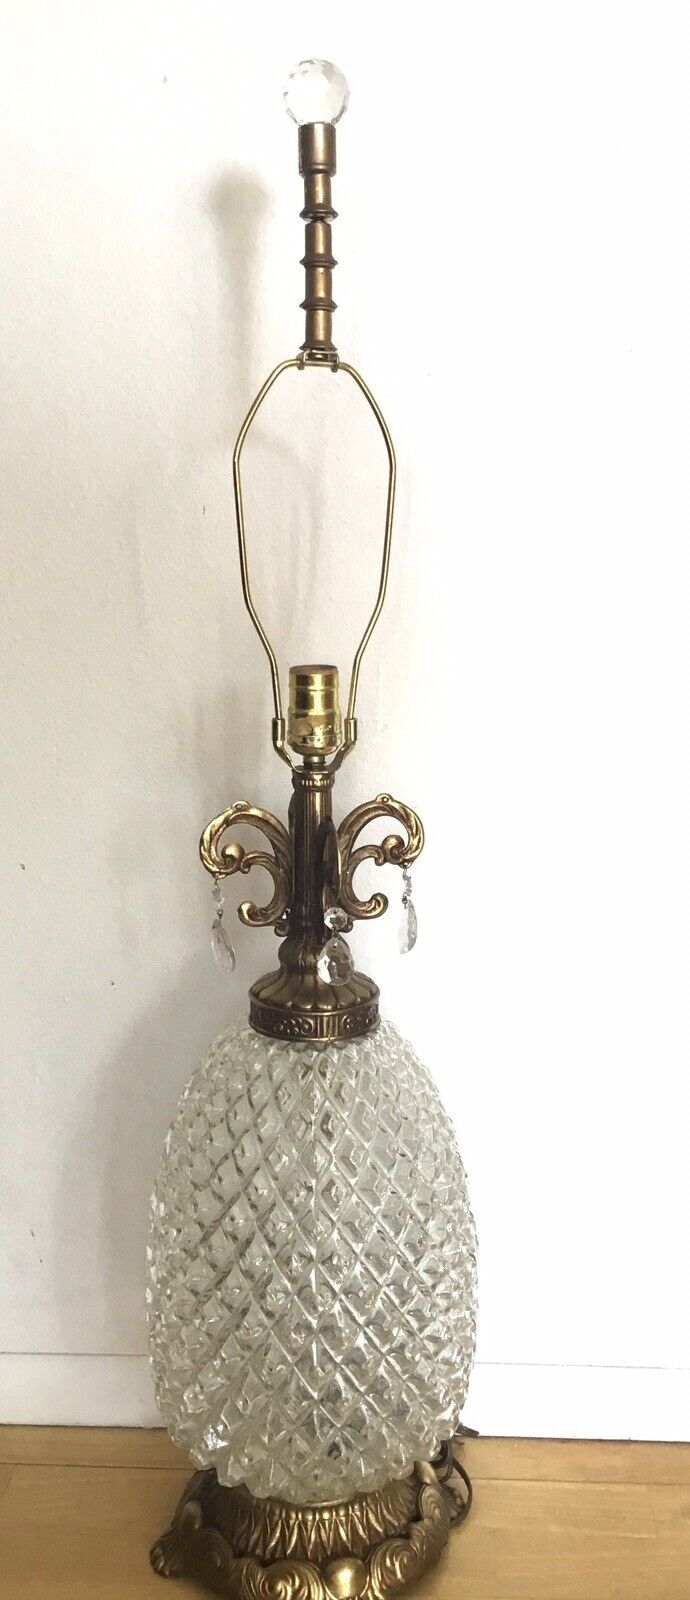 Vintage Hollywood Regency Style Glass & Brass Table Lamp with Pineapple-Shape